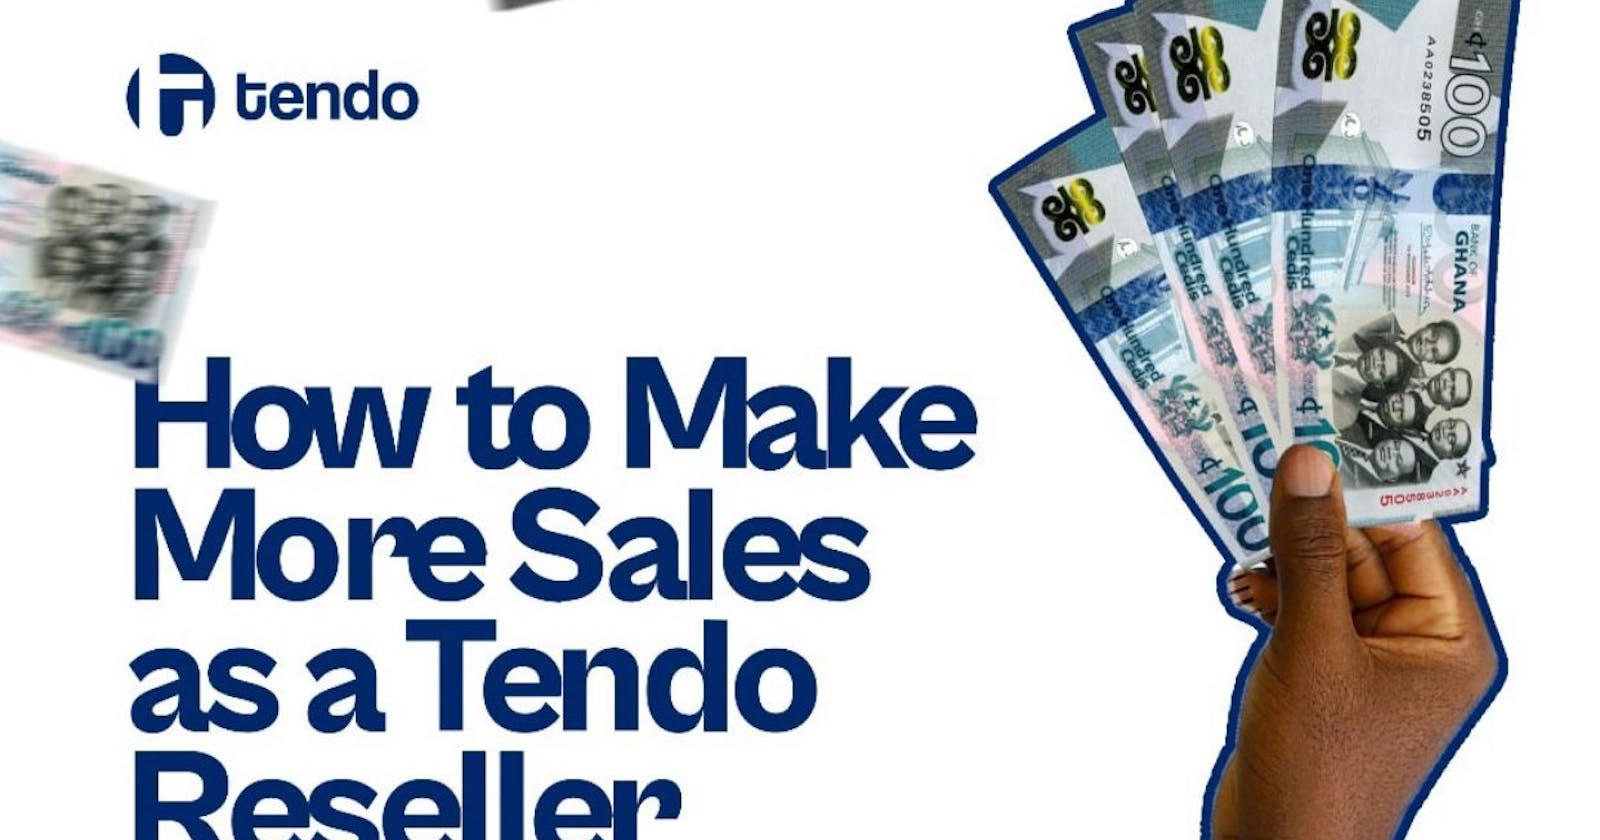 Make Money From Home 
(The Ghanaian Way) with Tendo